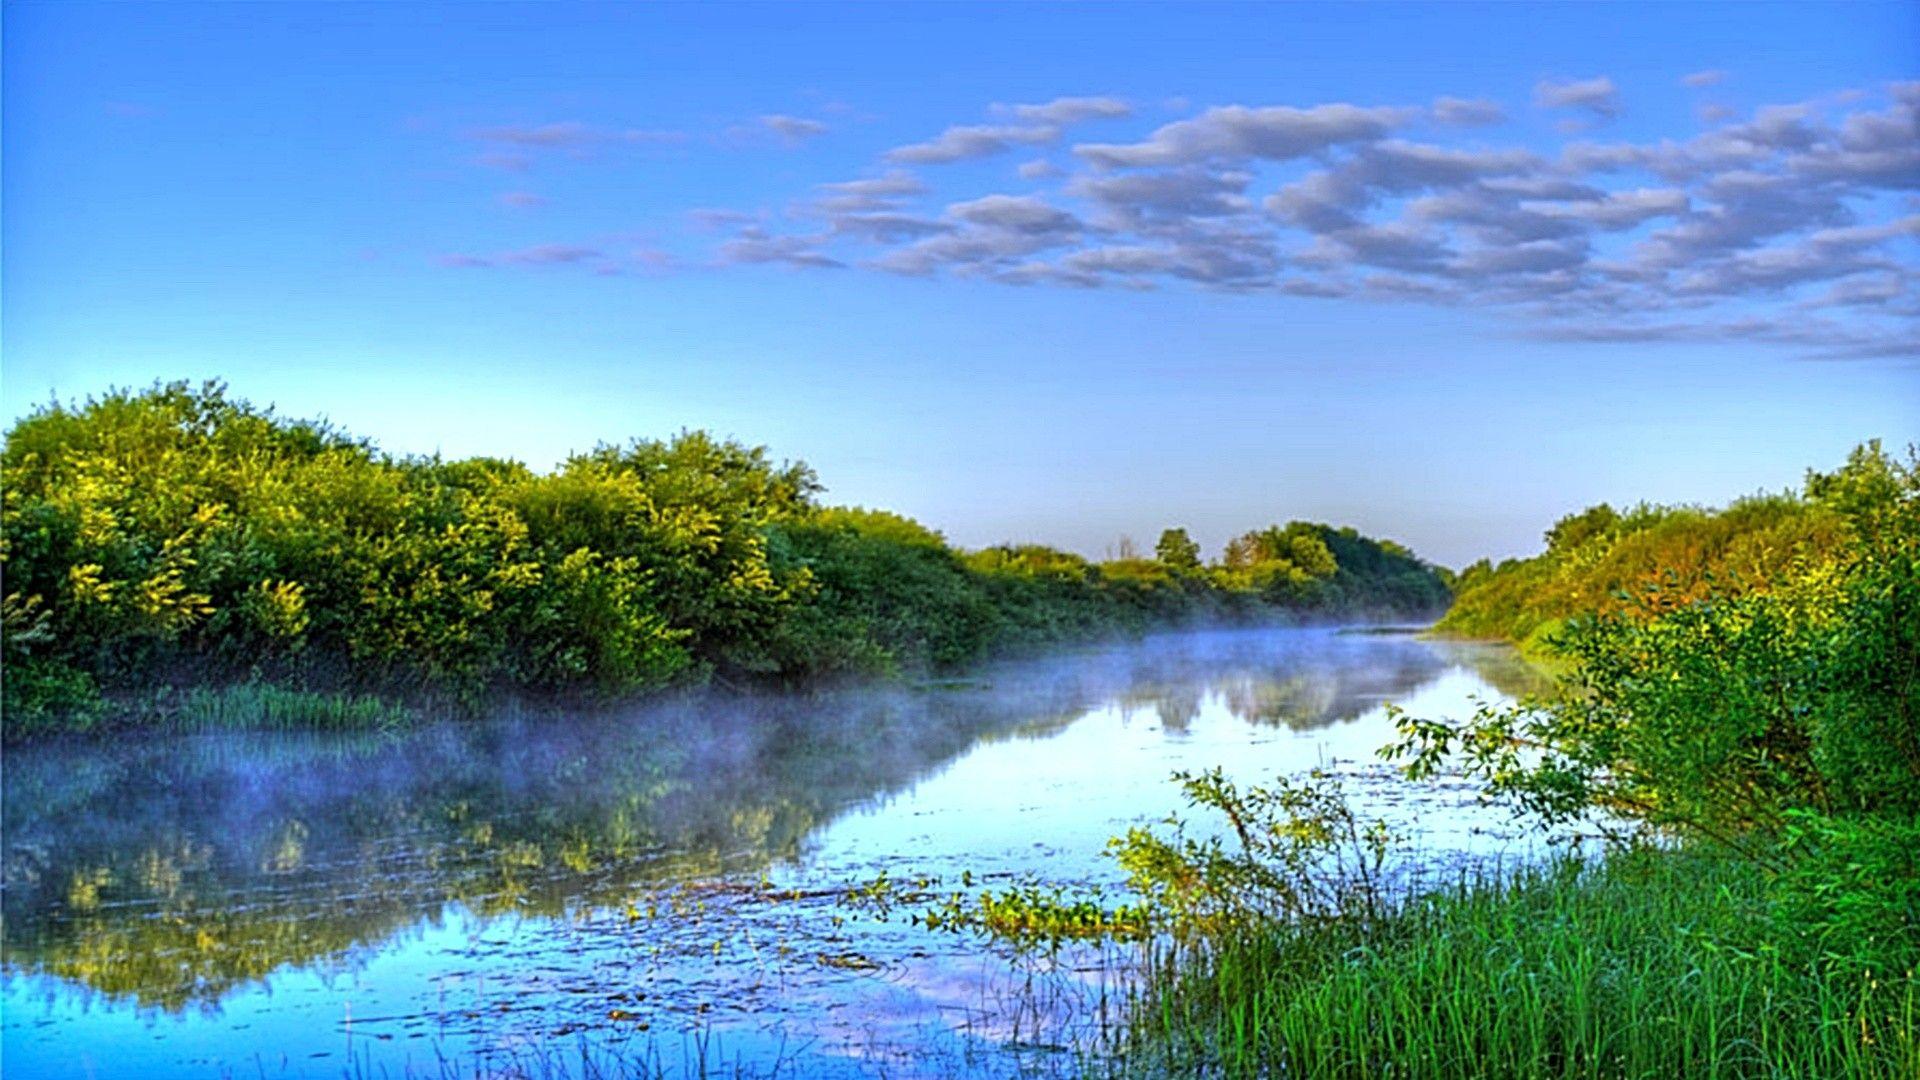 Rivers: Blue Lovely Morning Refresh Awesome Beauty Cool River